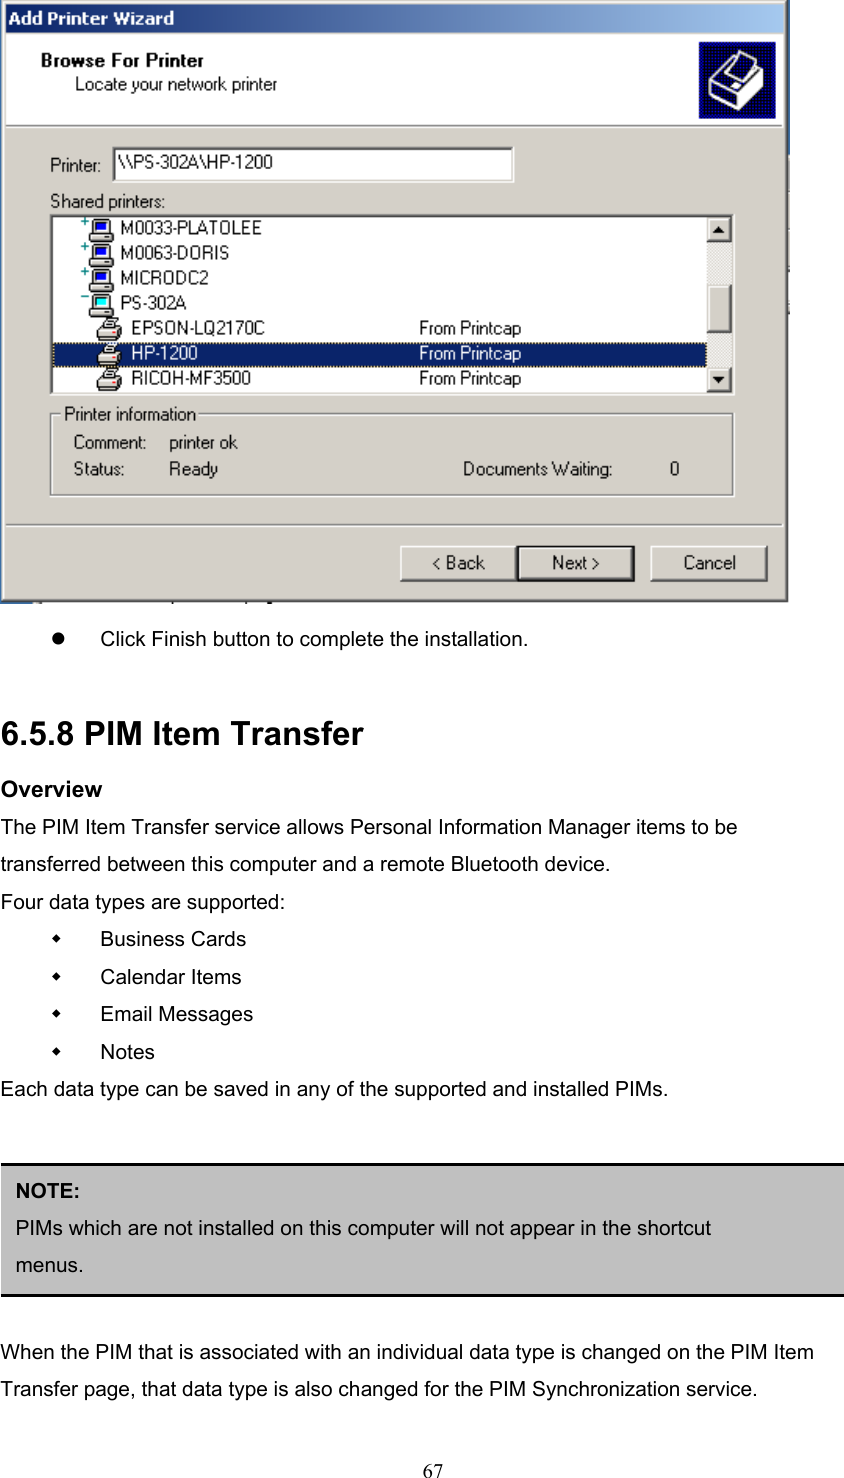  67    Click Finish button to complete the installation.    6.5.8 PIM Item Transfer Overview The PIM Item Transfer service allows Personal Information Manager items to be transferred between this computer and a remote Bluetooth device. Four data types are supported:   Business Cards   Calendar Items   Email Messages   Notes Each data type can be saved in any of the supported and installed PIMs.       When the PIM that is associated with an individual data type is changed on the PIM Item Transfer page, that data type is also changed for the PIM Synchronization service. NOTE:  PIMs which are not installed on this computer will not appear in the shortcut menus. 